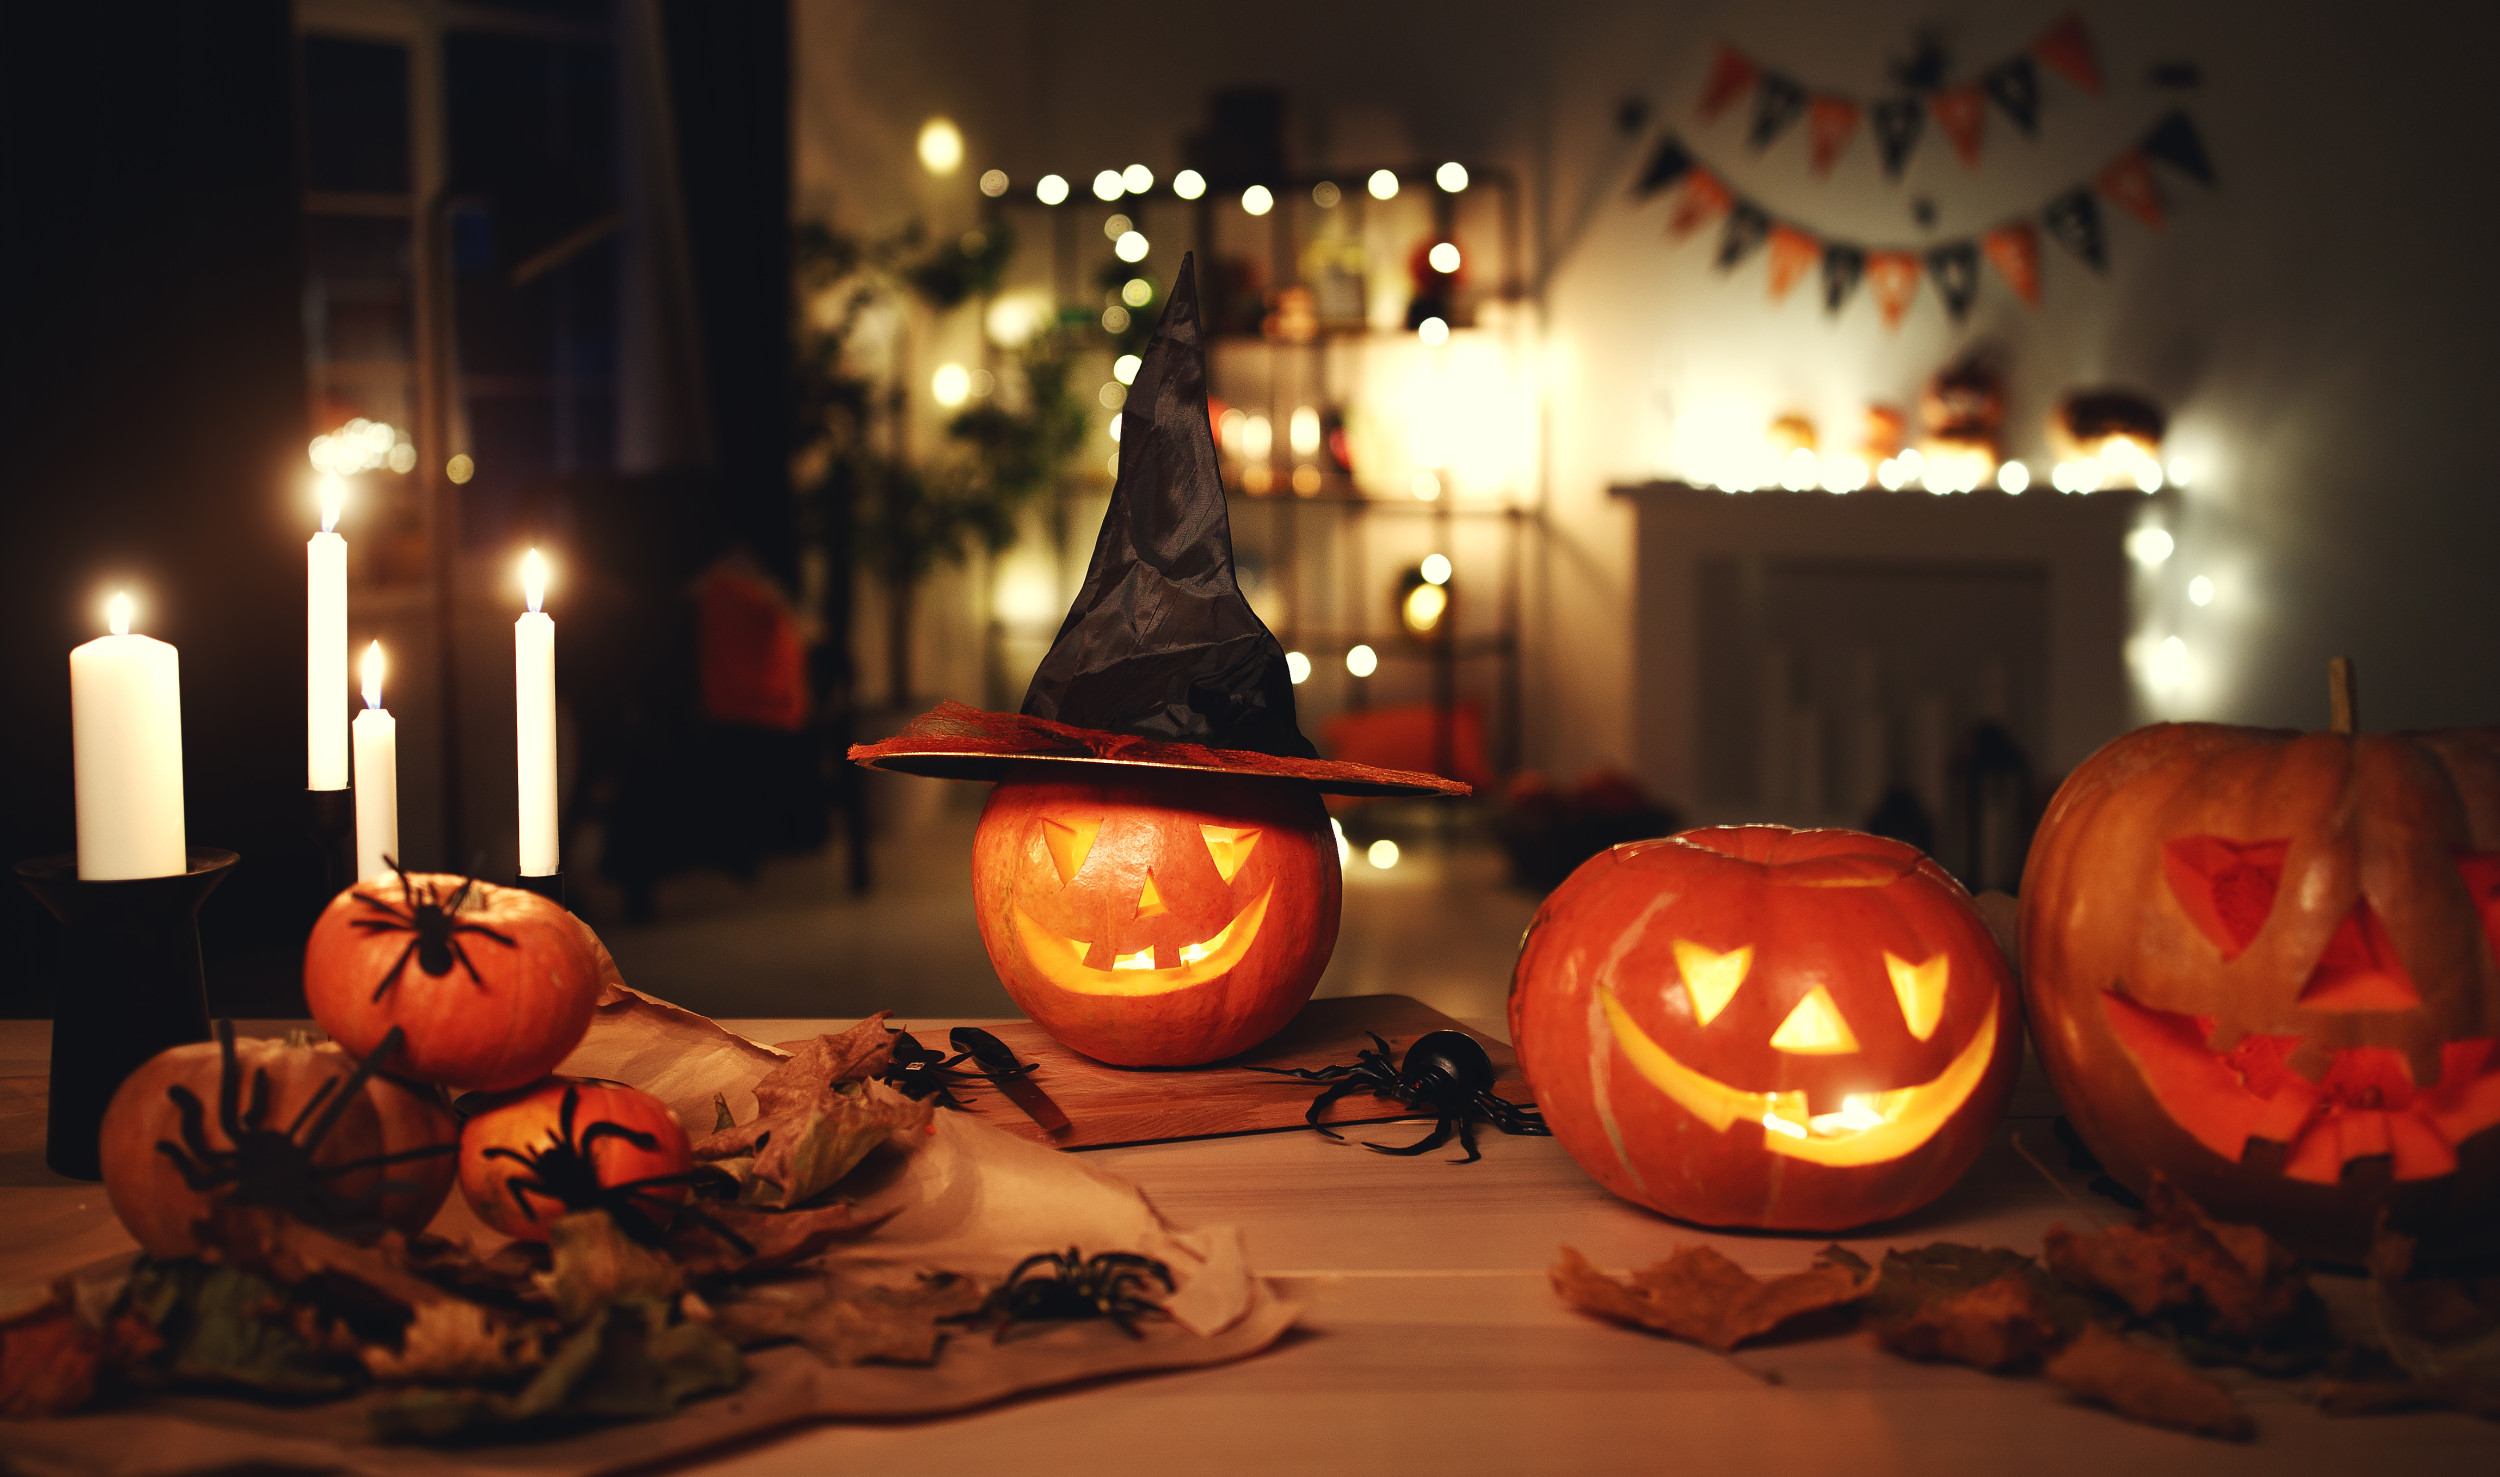 Last Minute Halloween Decor You Can DIY at Home